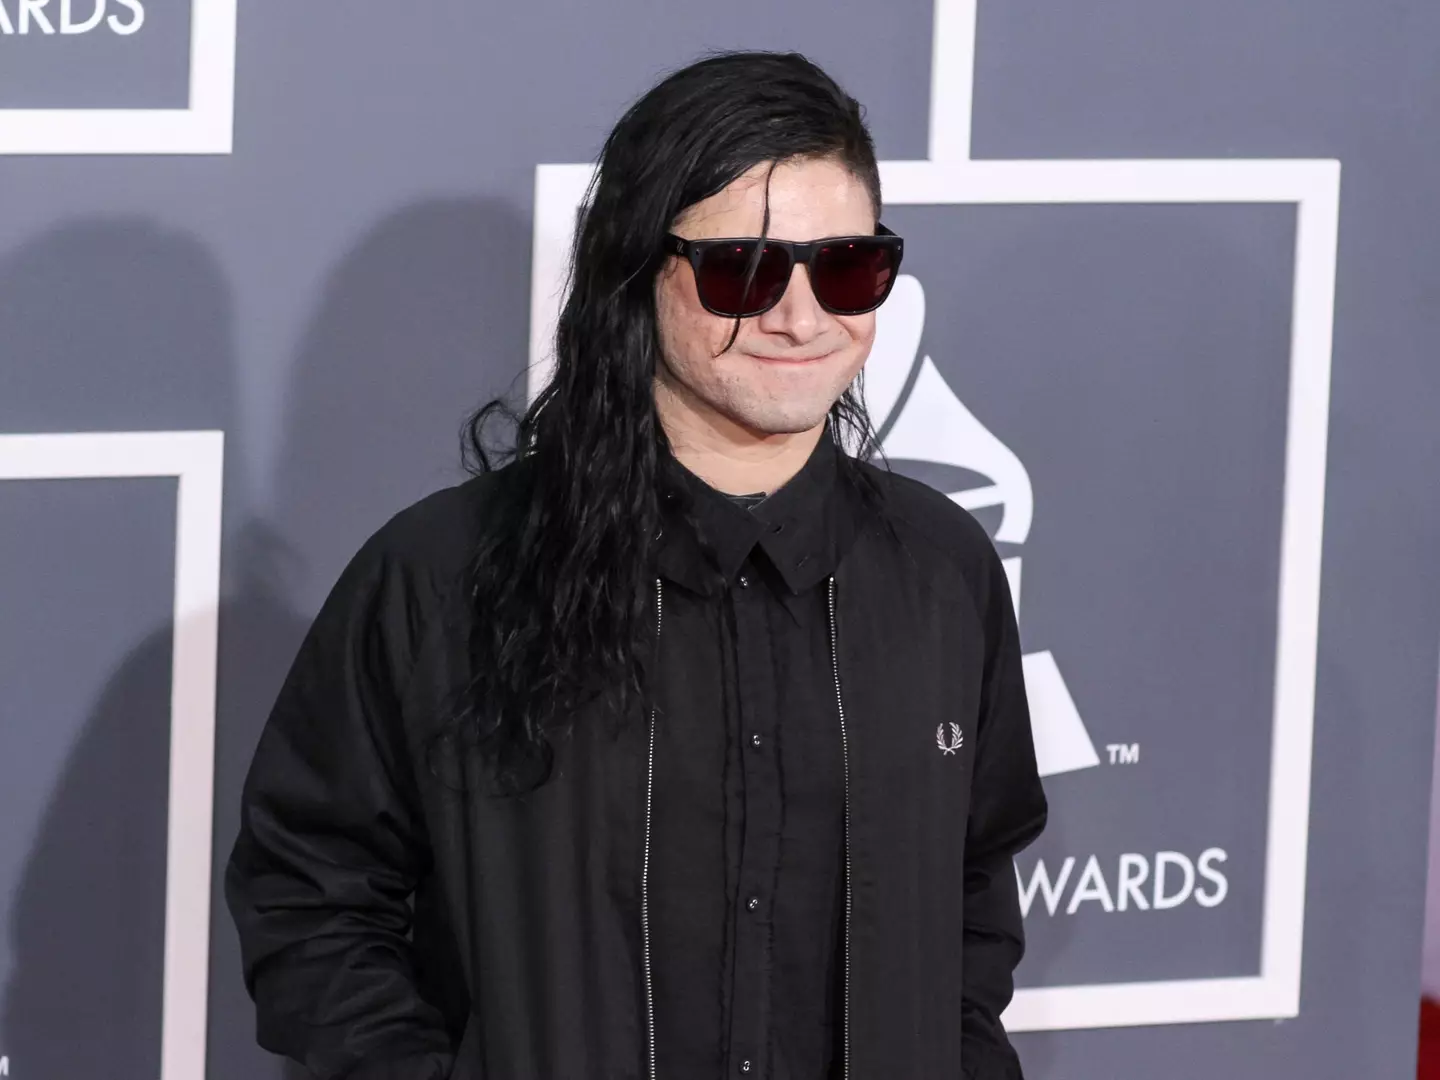 Skrillex was previously recognisable thanks to his long hair.